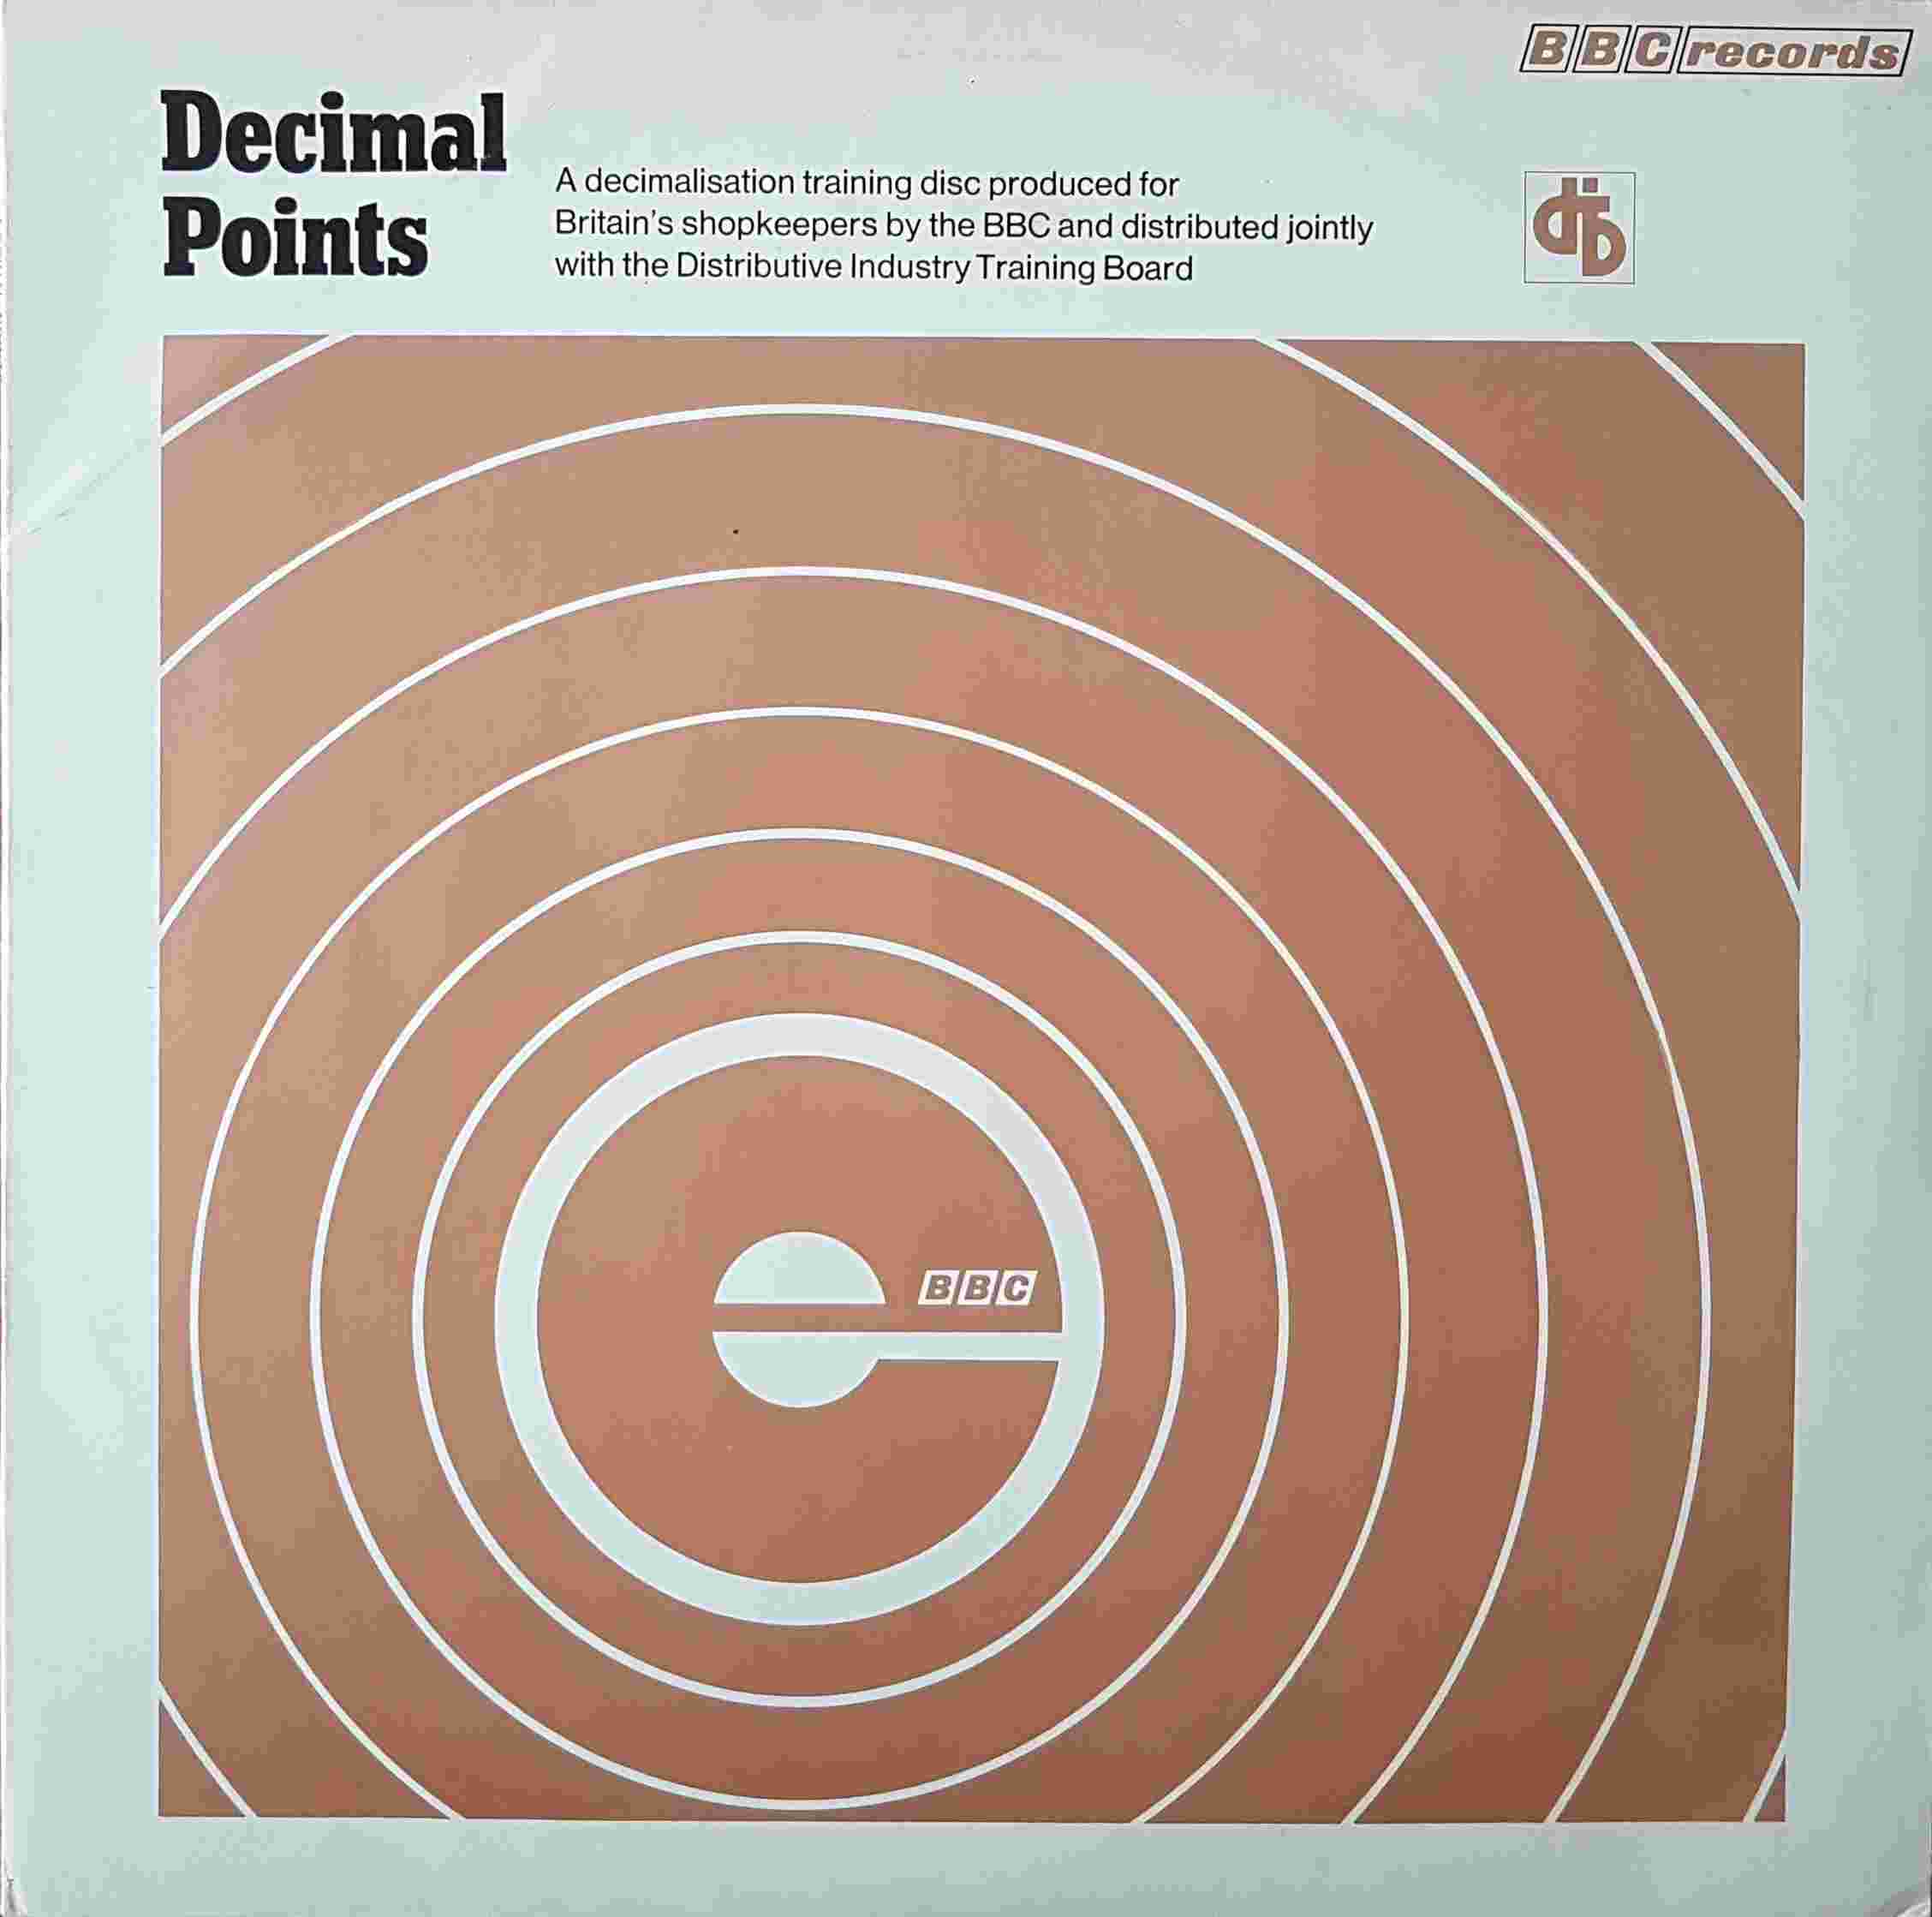 Picture of REMO 46 Decimal points by artist John Turtle from the BBC albums - Records and Tapes library